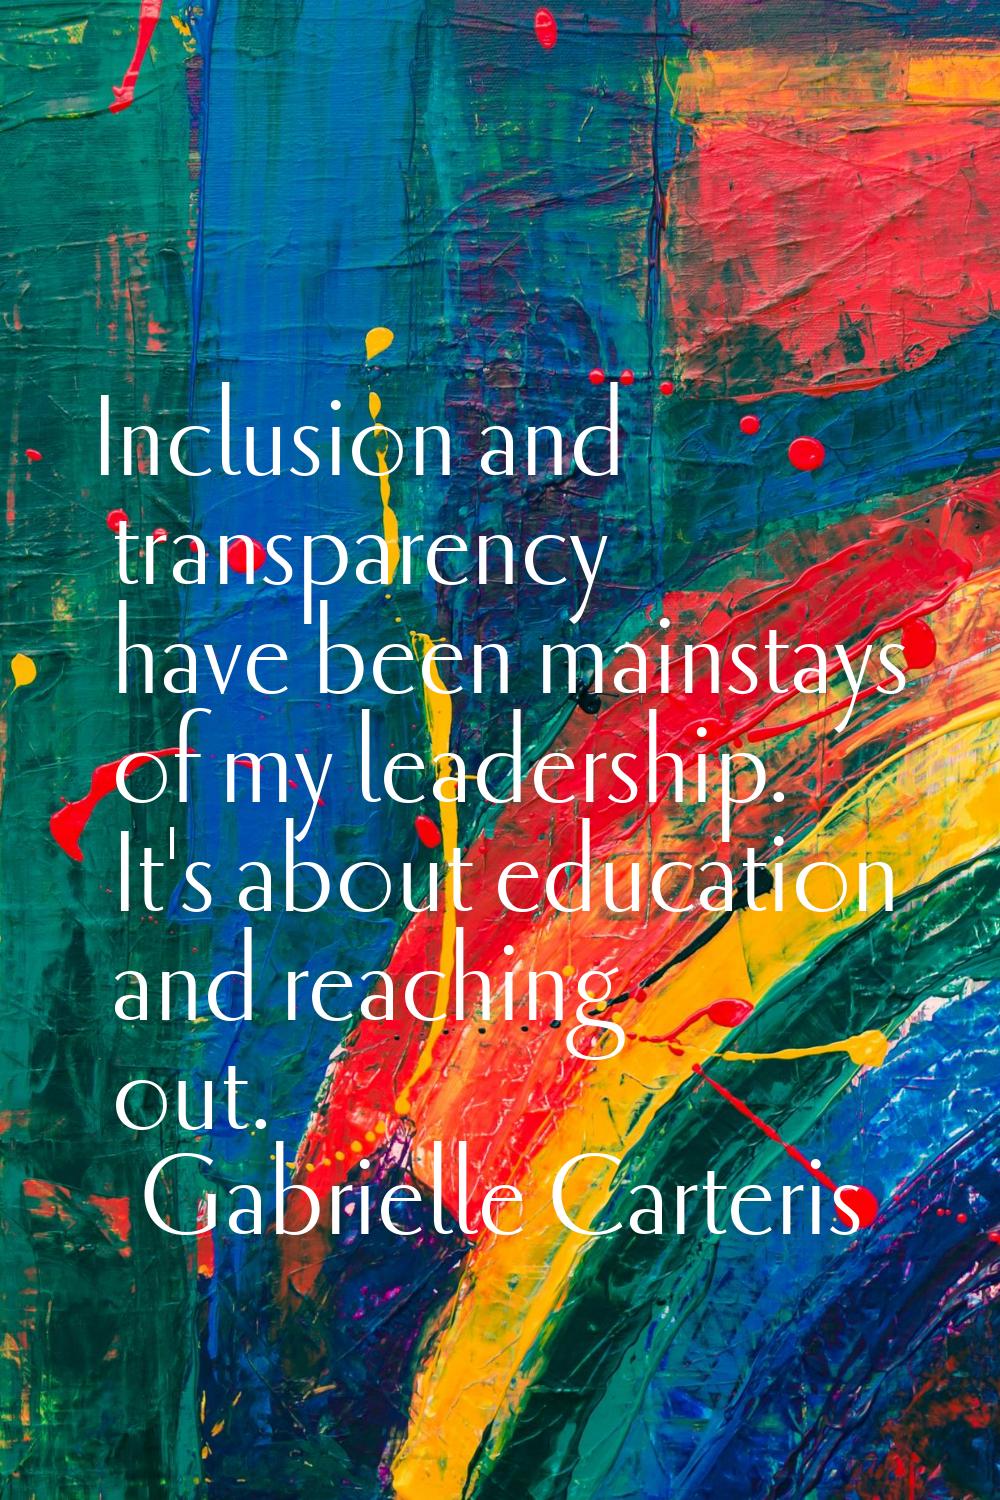 Inclusion and transparency have been mainstays of my leadership. It's about education and reaching 